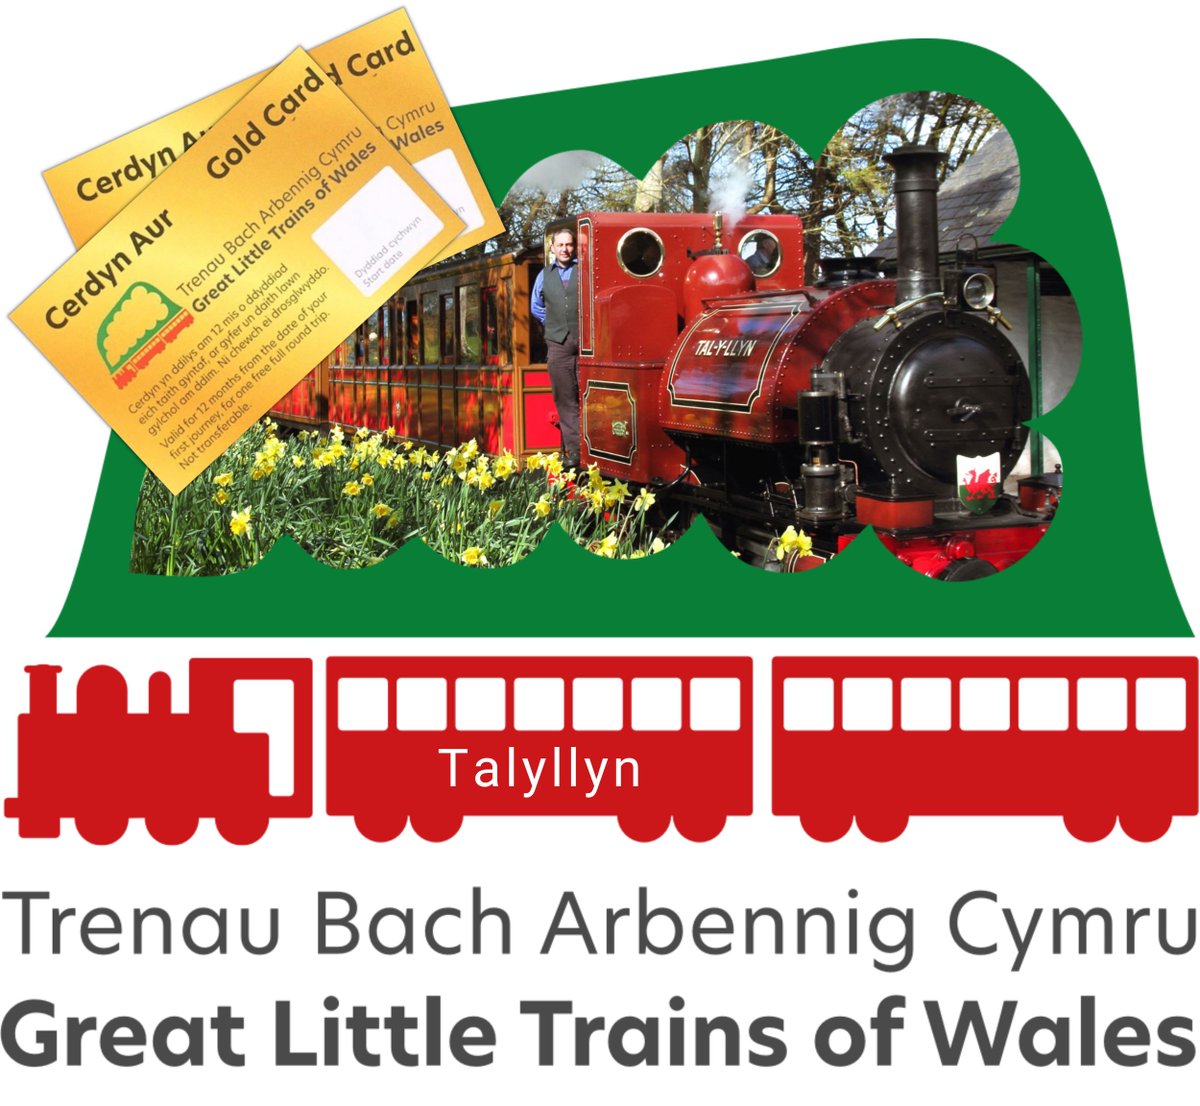 🚂 Let 11 scenic steam train trips transport you through the beautiful Welsh countryside. 🎟️ Gold Card offer £23 off (£152 till 23/04) 🔗 loom.ly/oE8uHOs 📸 @TalyllynRailway #23offGOLDCARDfor23days2023 #narrowgaugerailway #steamengine #wales #TalyllynRailway